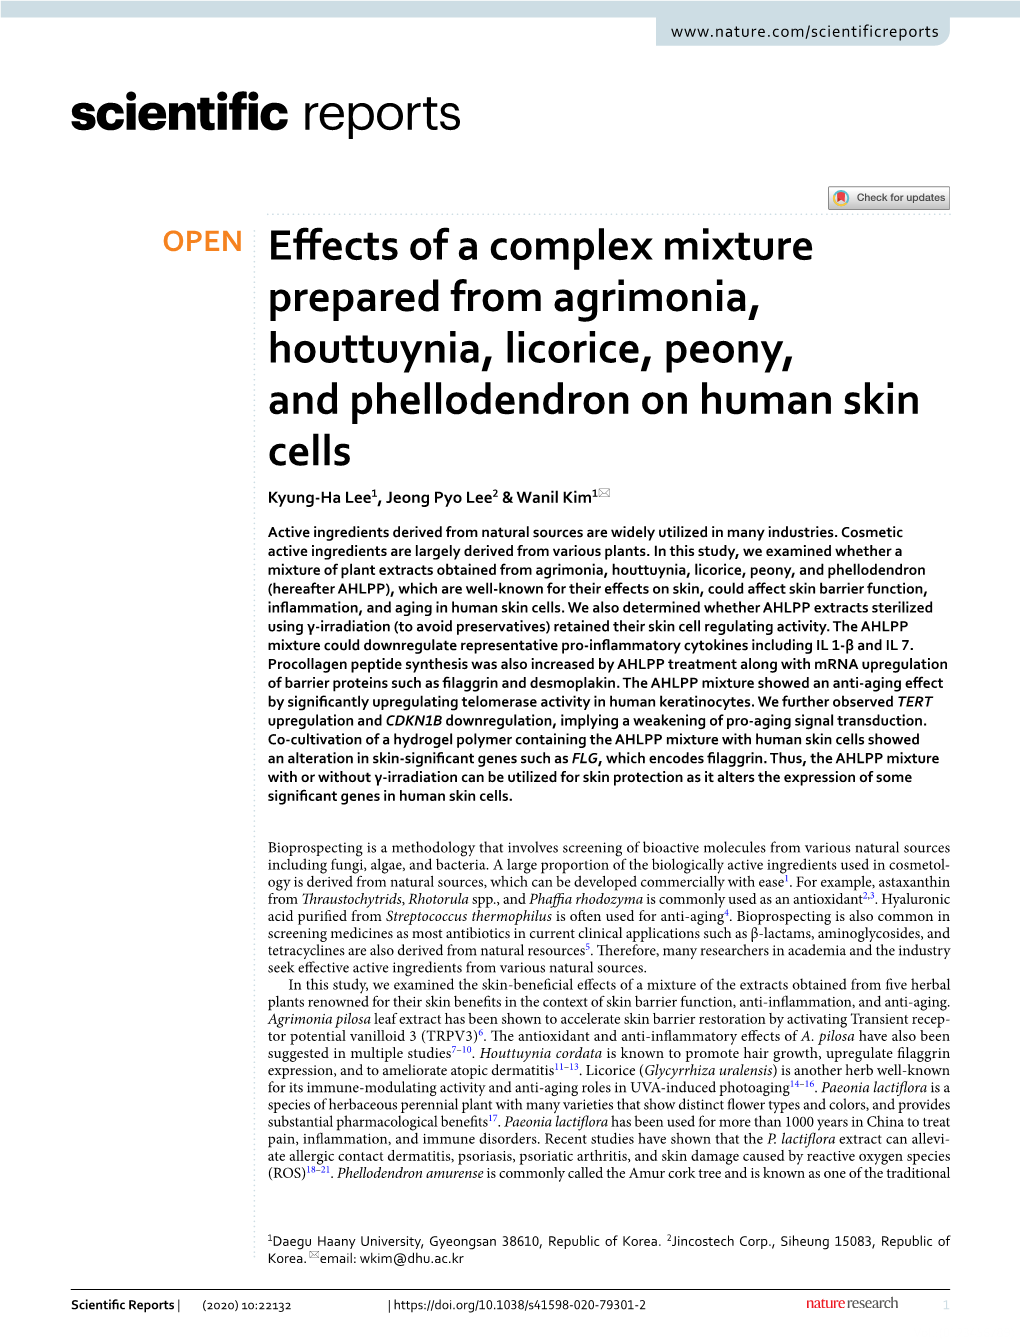 Effects of a Complex Mixture Prepared from Agrimonia, Houttuynia, Licorice